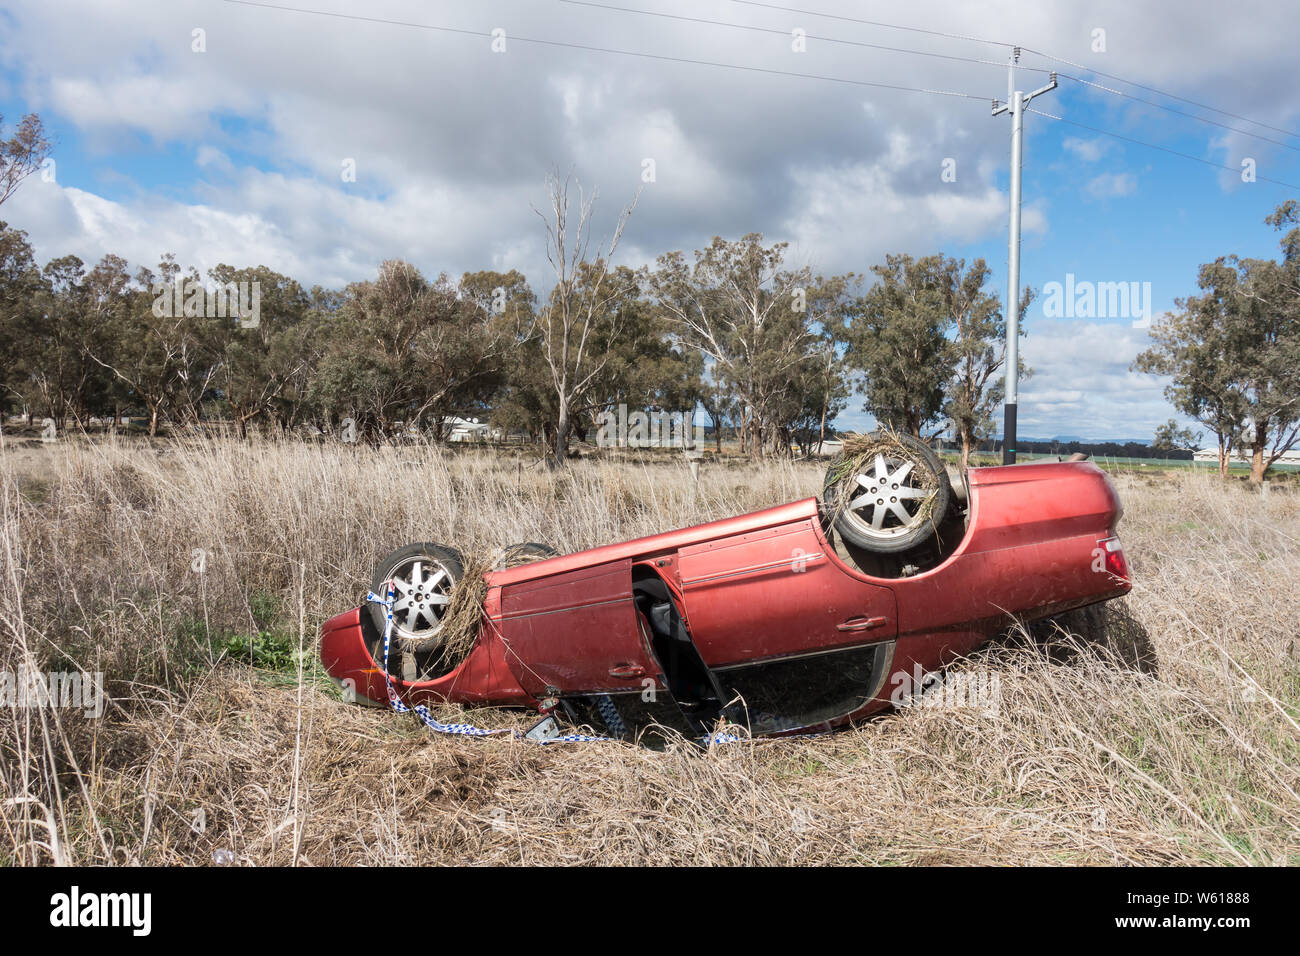 Red car in roll over accident on country road, Australia. Stock Photo